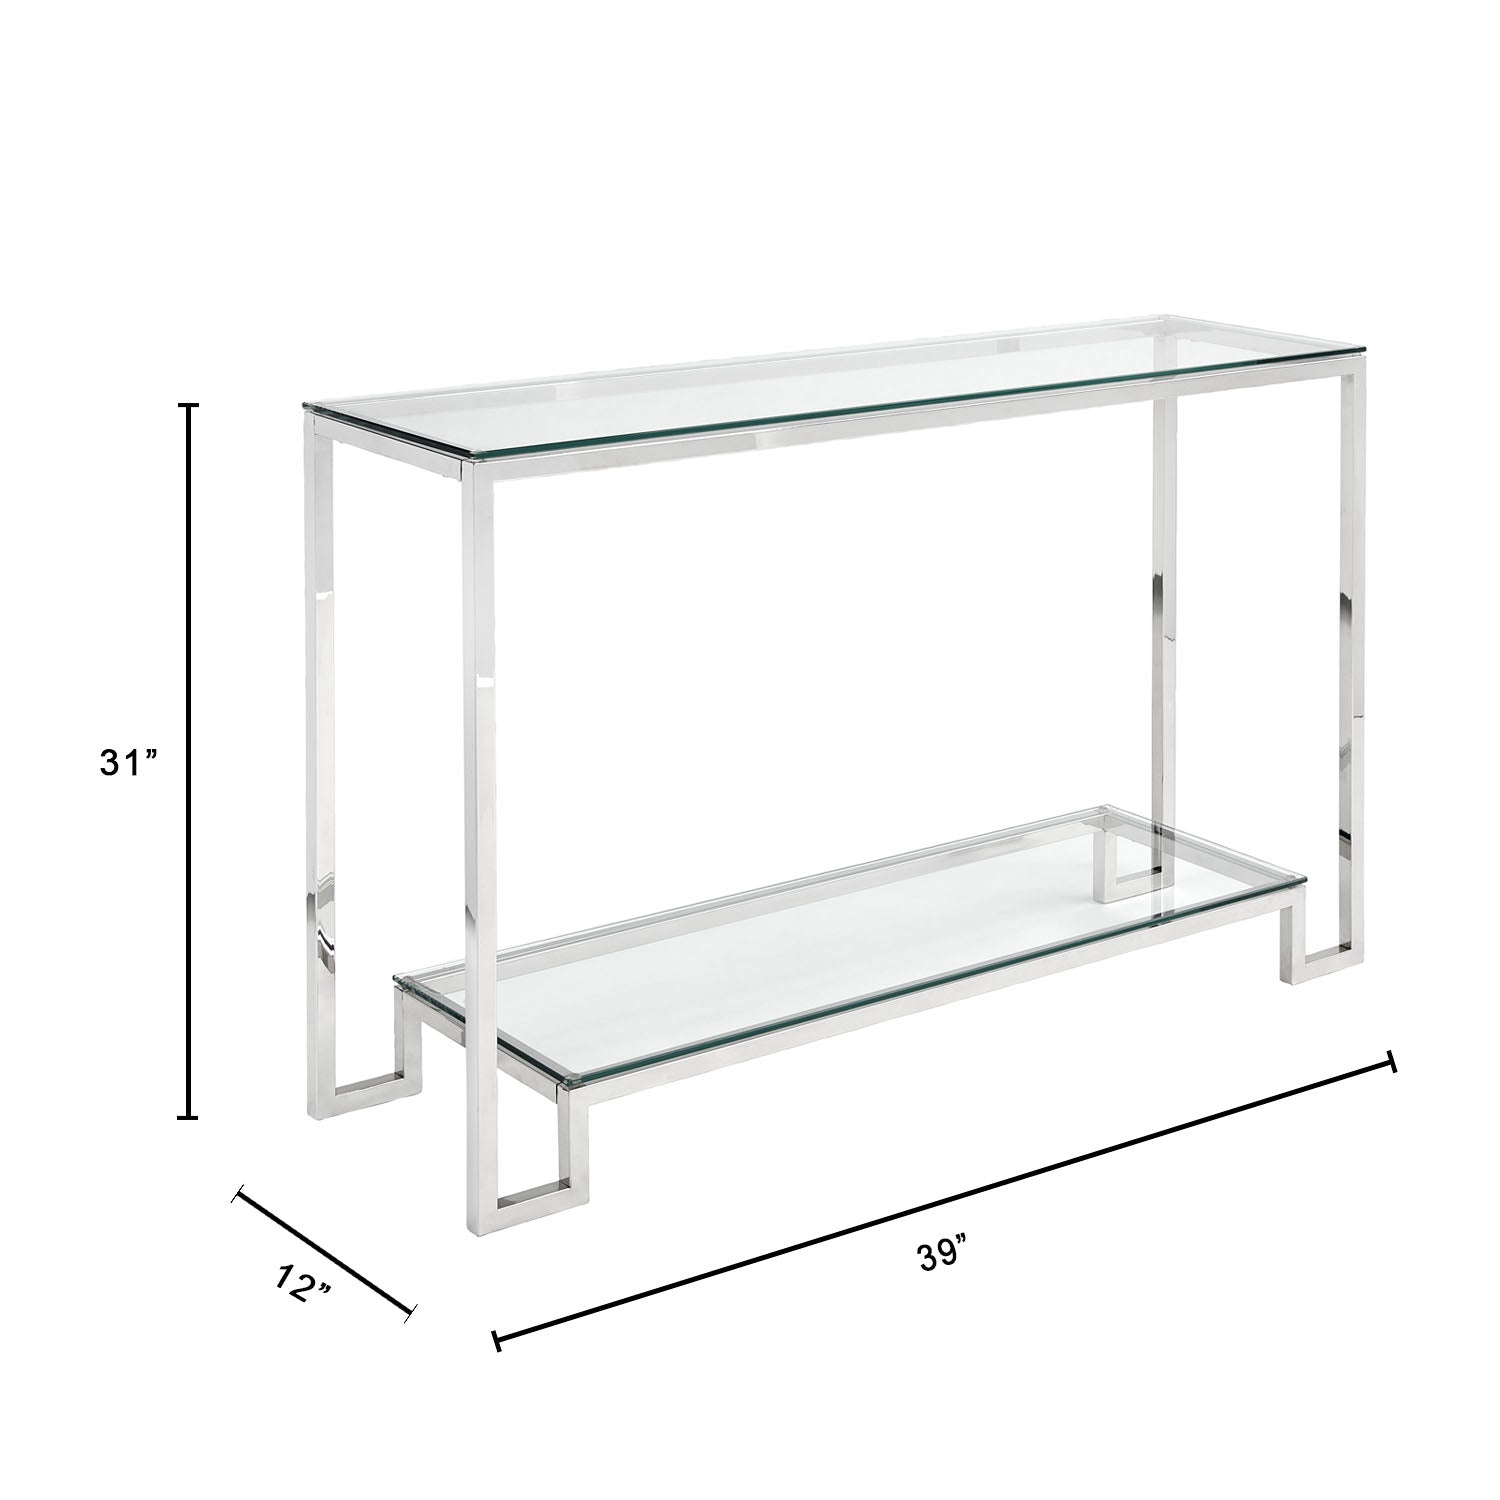 Elegant Krista Glass Console Table with Stainless Steel Frame